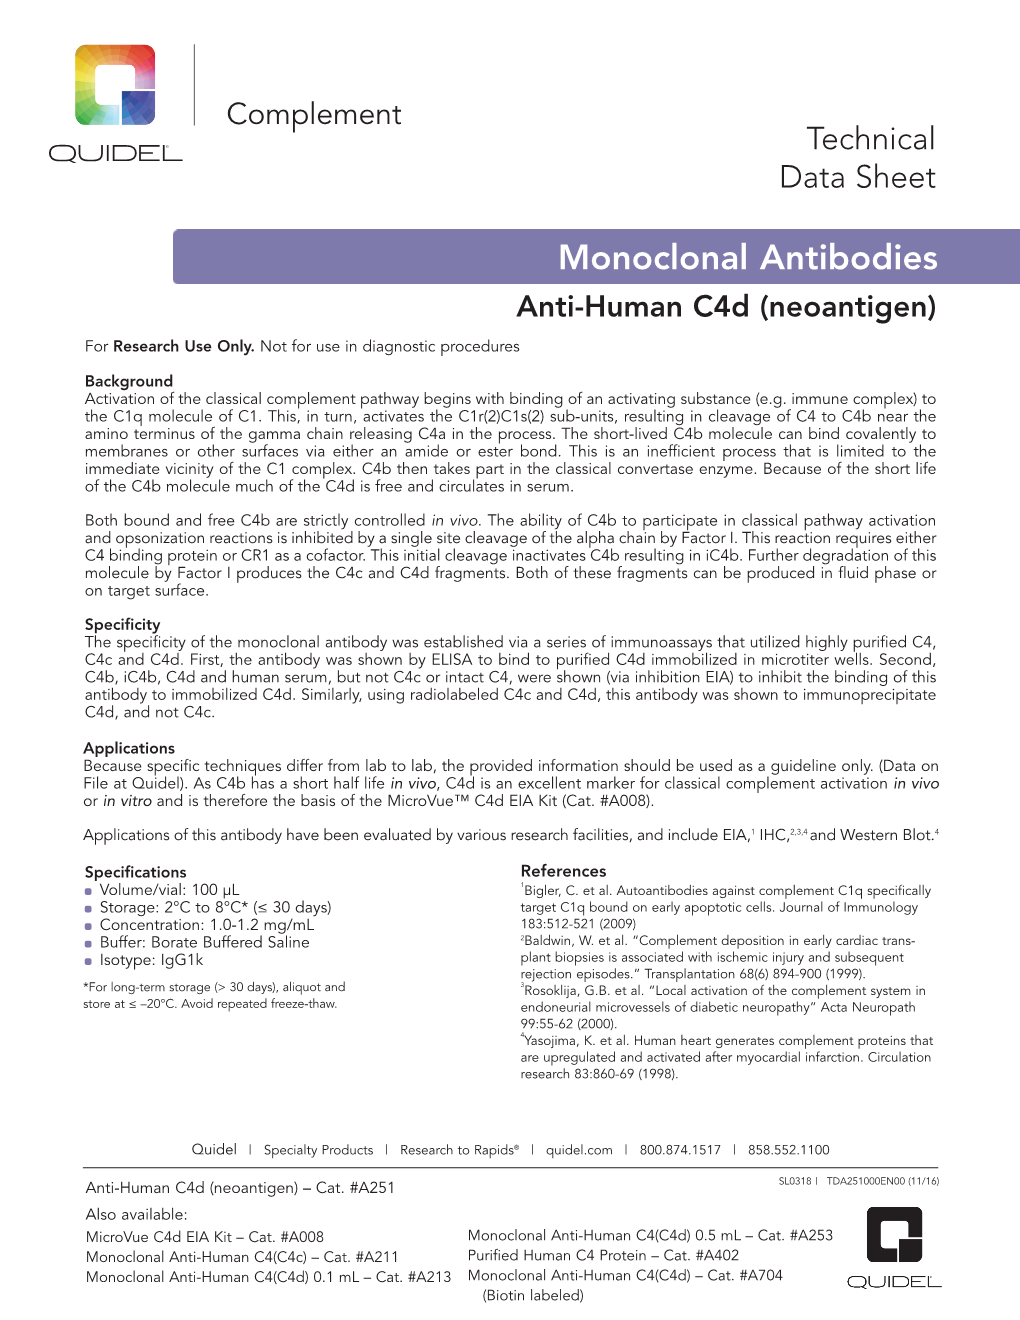 Monoclonal Antibodies Anti-Human C4d (Neoantigen) for Research Use Only